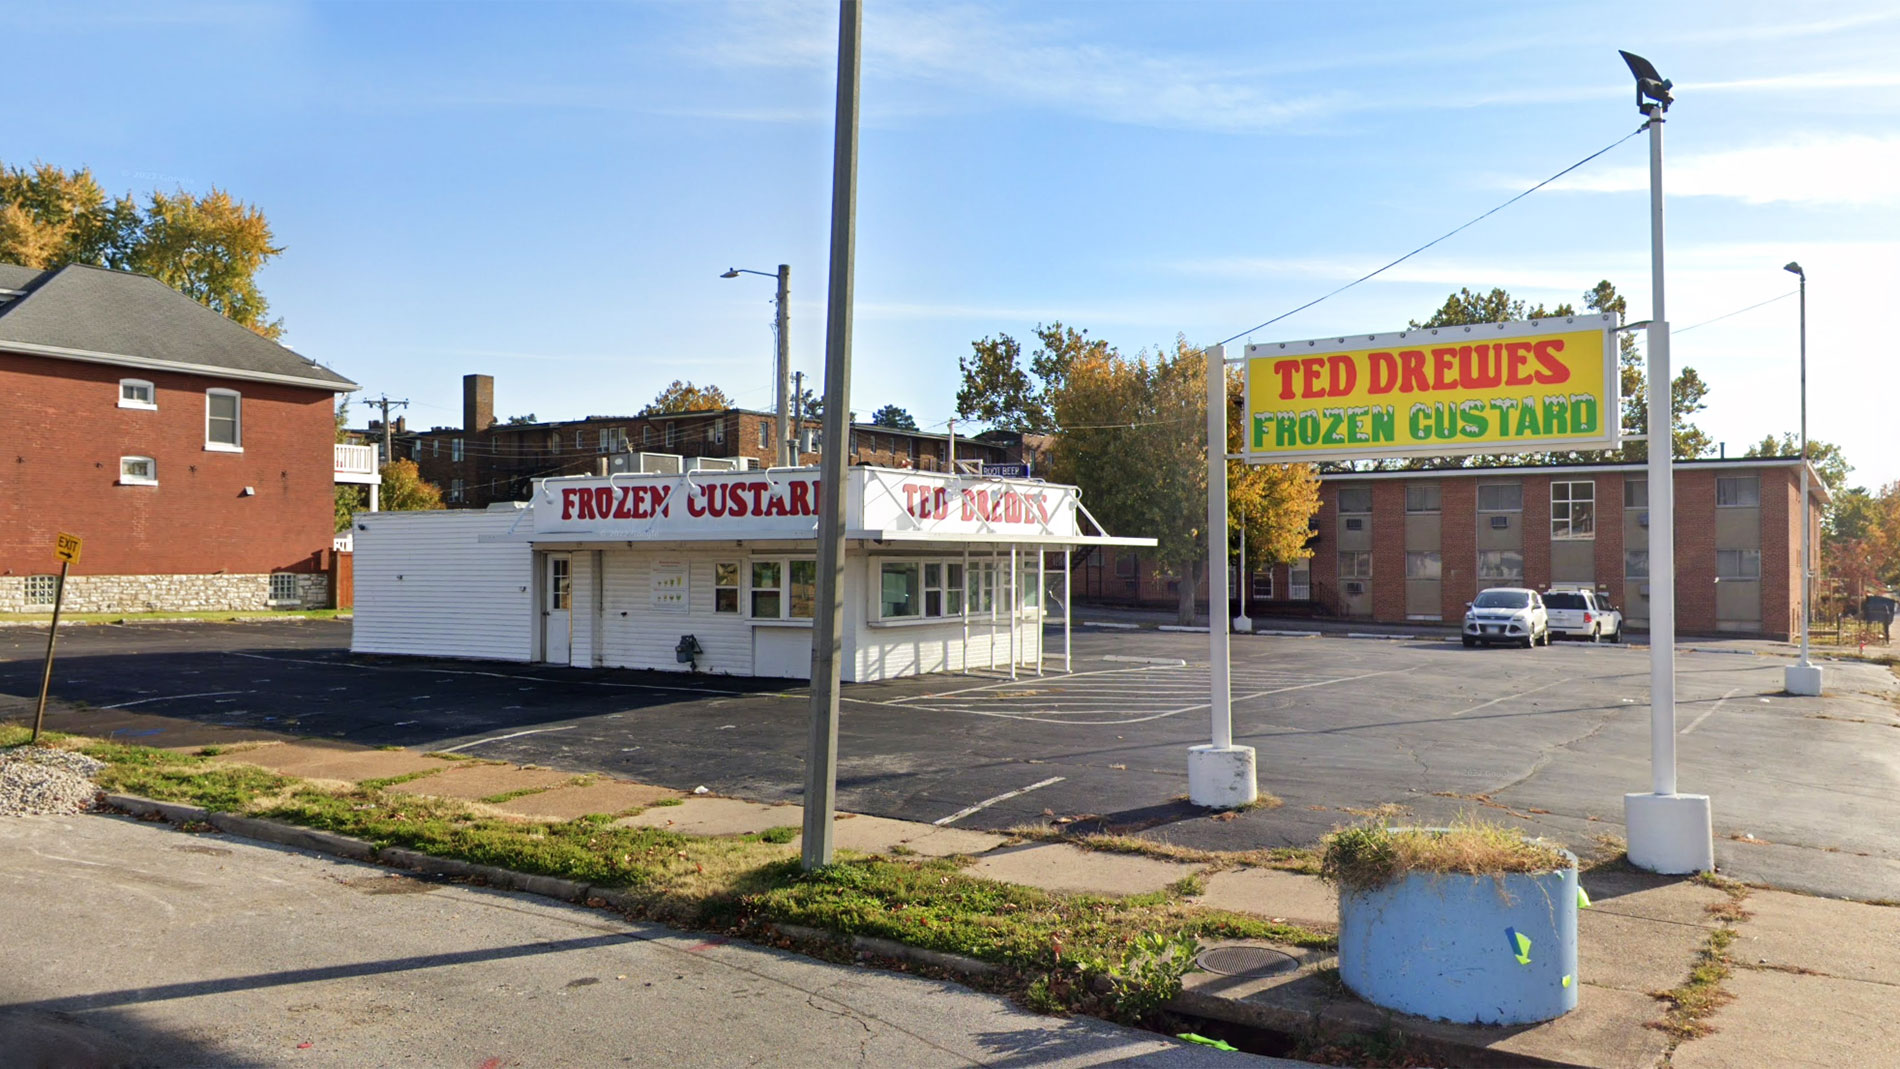 ted drewes frozen custard on south grand boulevard in st. louis, missouri